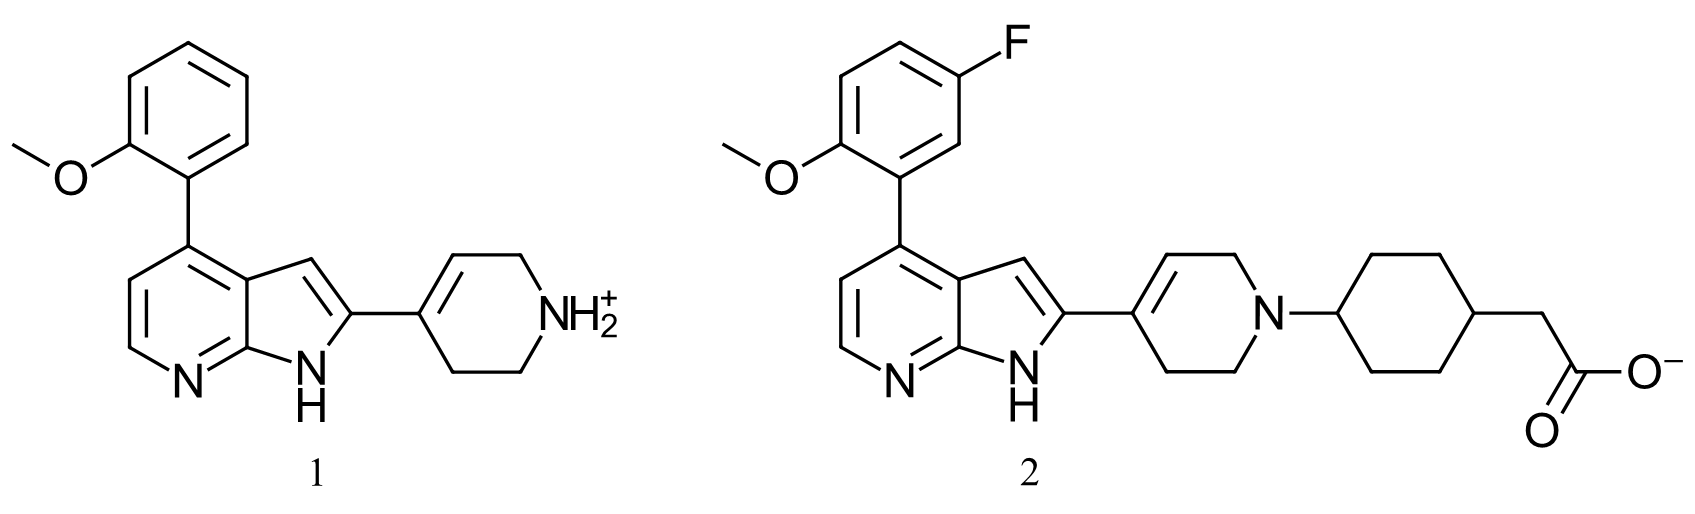 Figure 2. Compound 1 (4PEP) and Compound 2